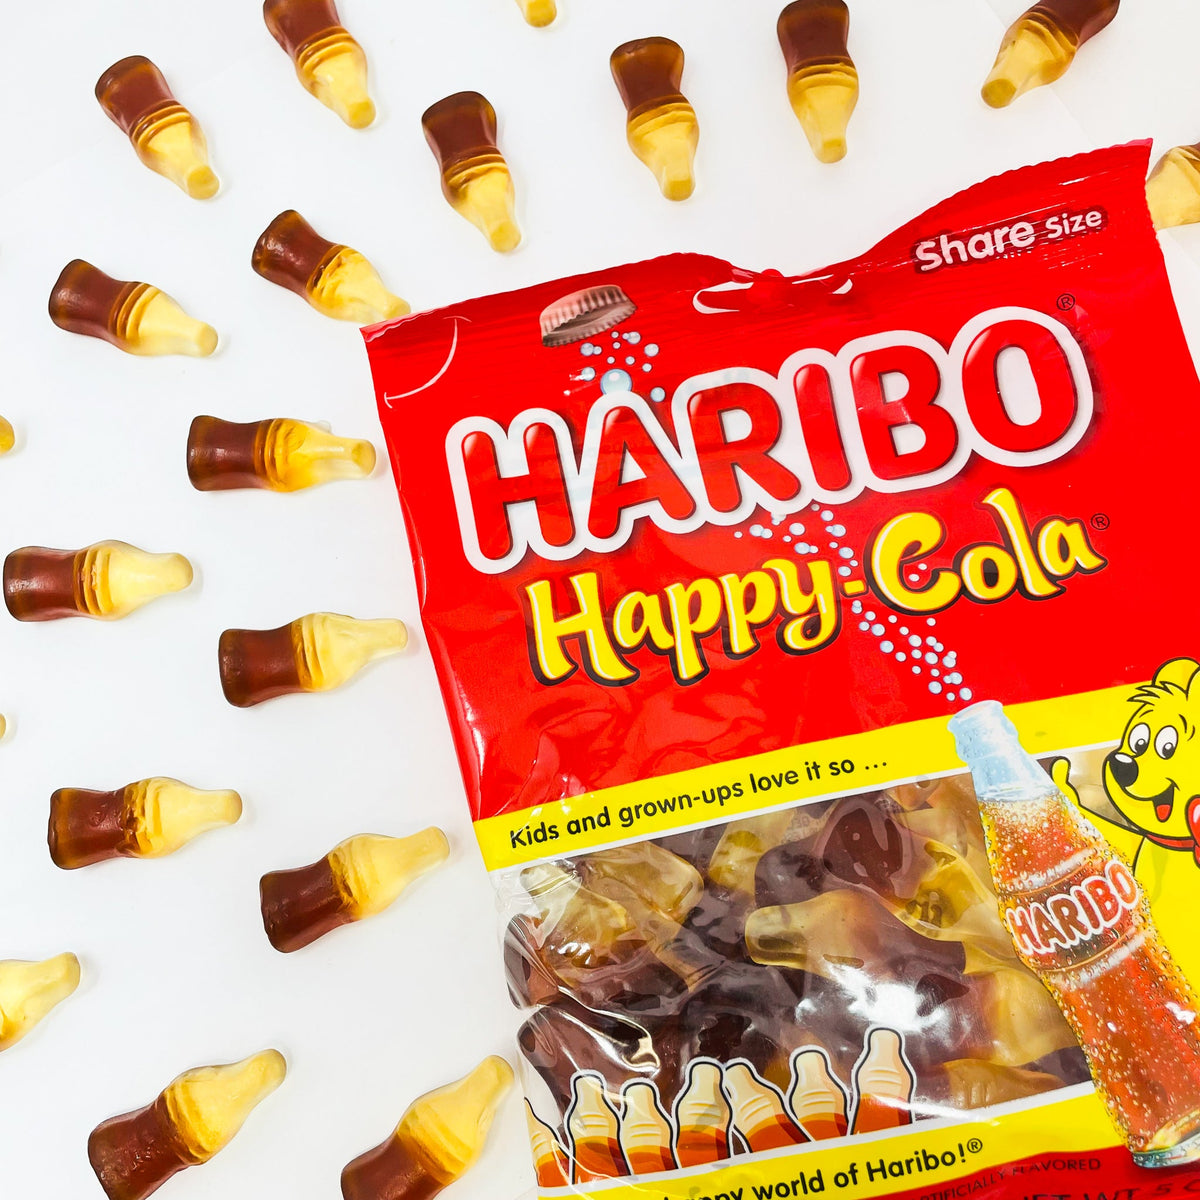 Haribo Happy Cola Gummi Candy-5 oz., Haribo Happy Cola, gummi candy, cola bottle-shaped gummies, sweet and tangy flavors, fizzy delight, refreshing snack, Candy Funhouse